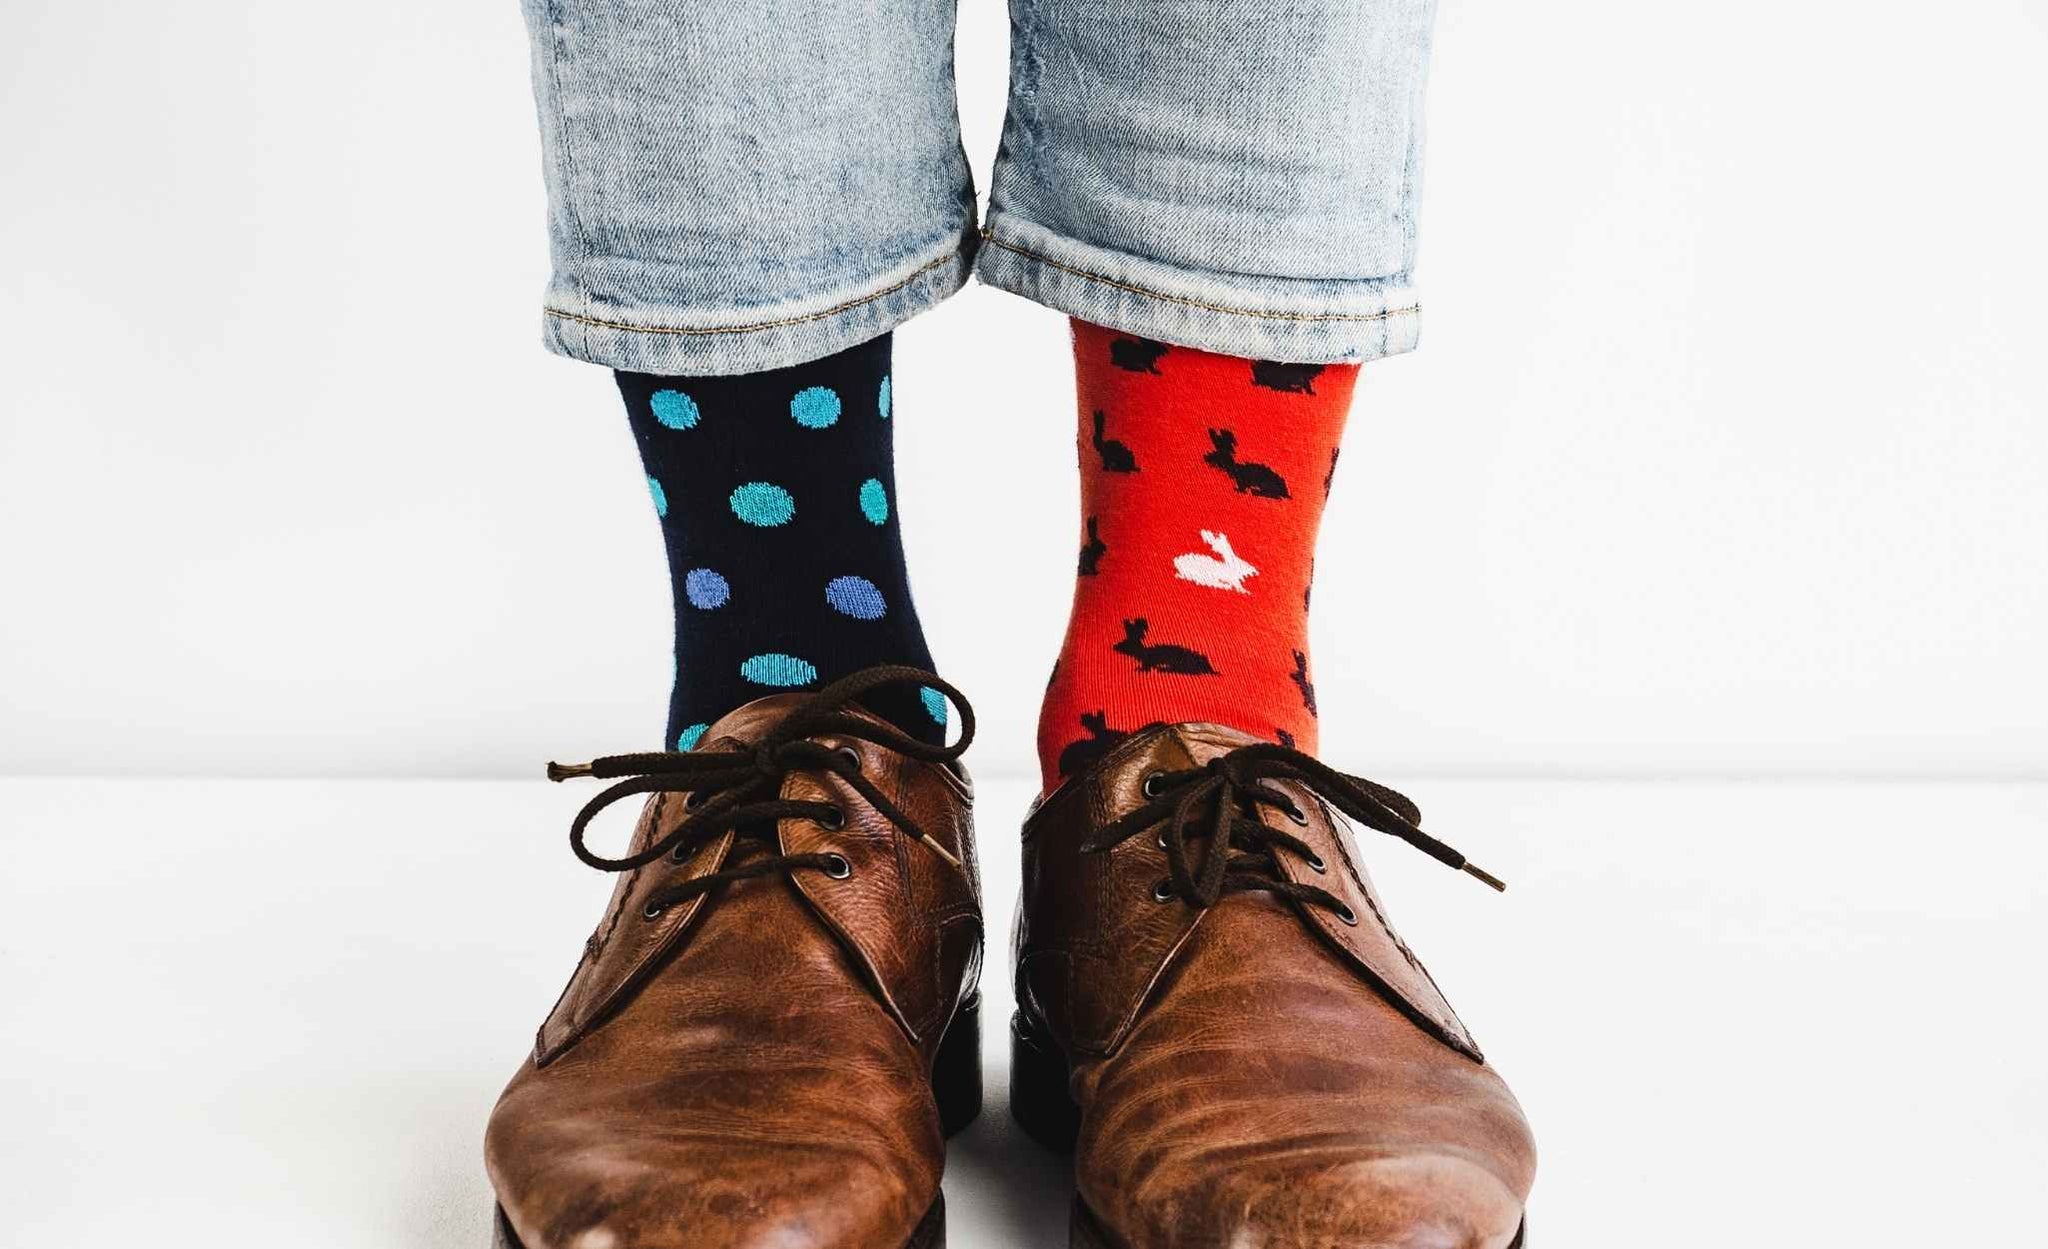 Why are socks important? And Benefits of wearing socks?